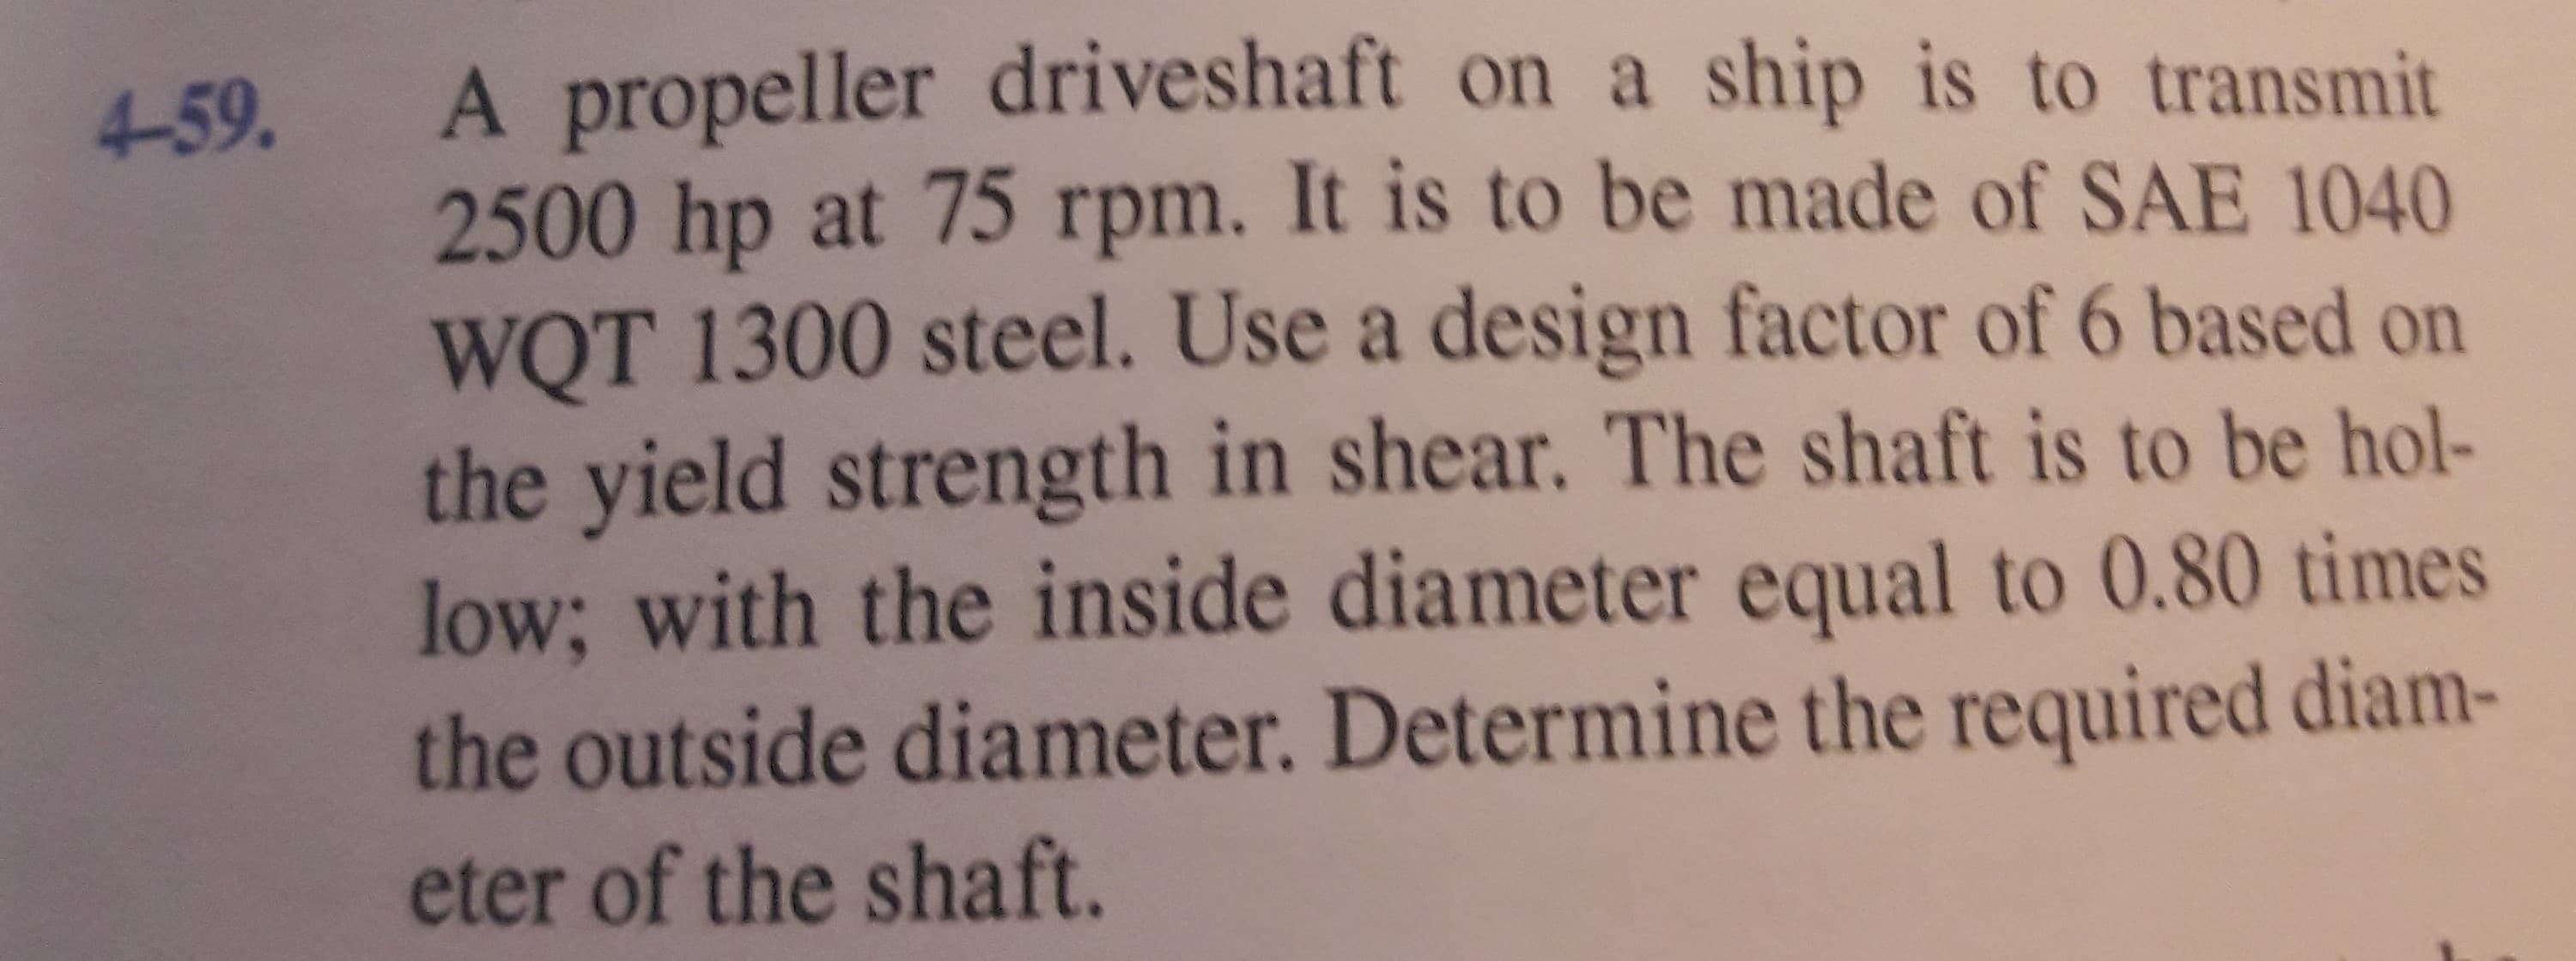 4-59.
A propeller driveshaft on a ship is to transmit
2500 hp at 75 rpm. It is to be made of SAE 1040
WQT 1300 steel. Use a design factor of 6 based on
the yield strength in shear. The shaft is to be hol-
low; with the inside diameter equal to 0.80 times
the outside diameter. Determine the required diam-
eter of the shaft.
